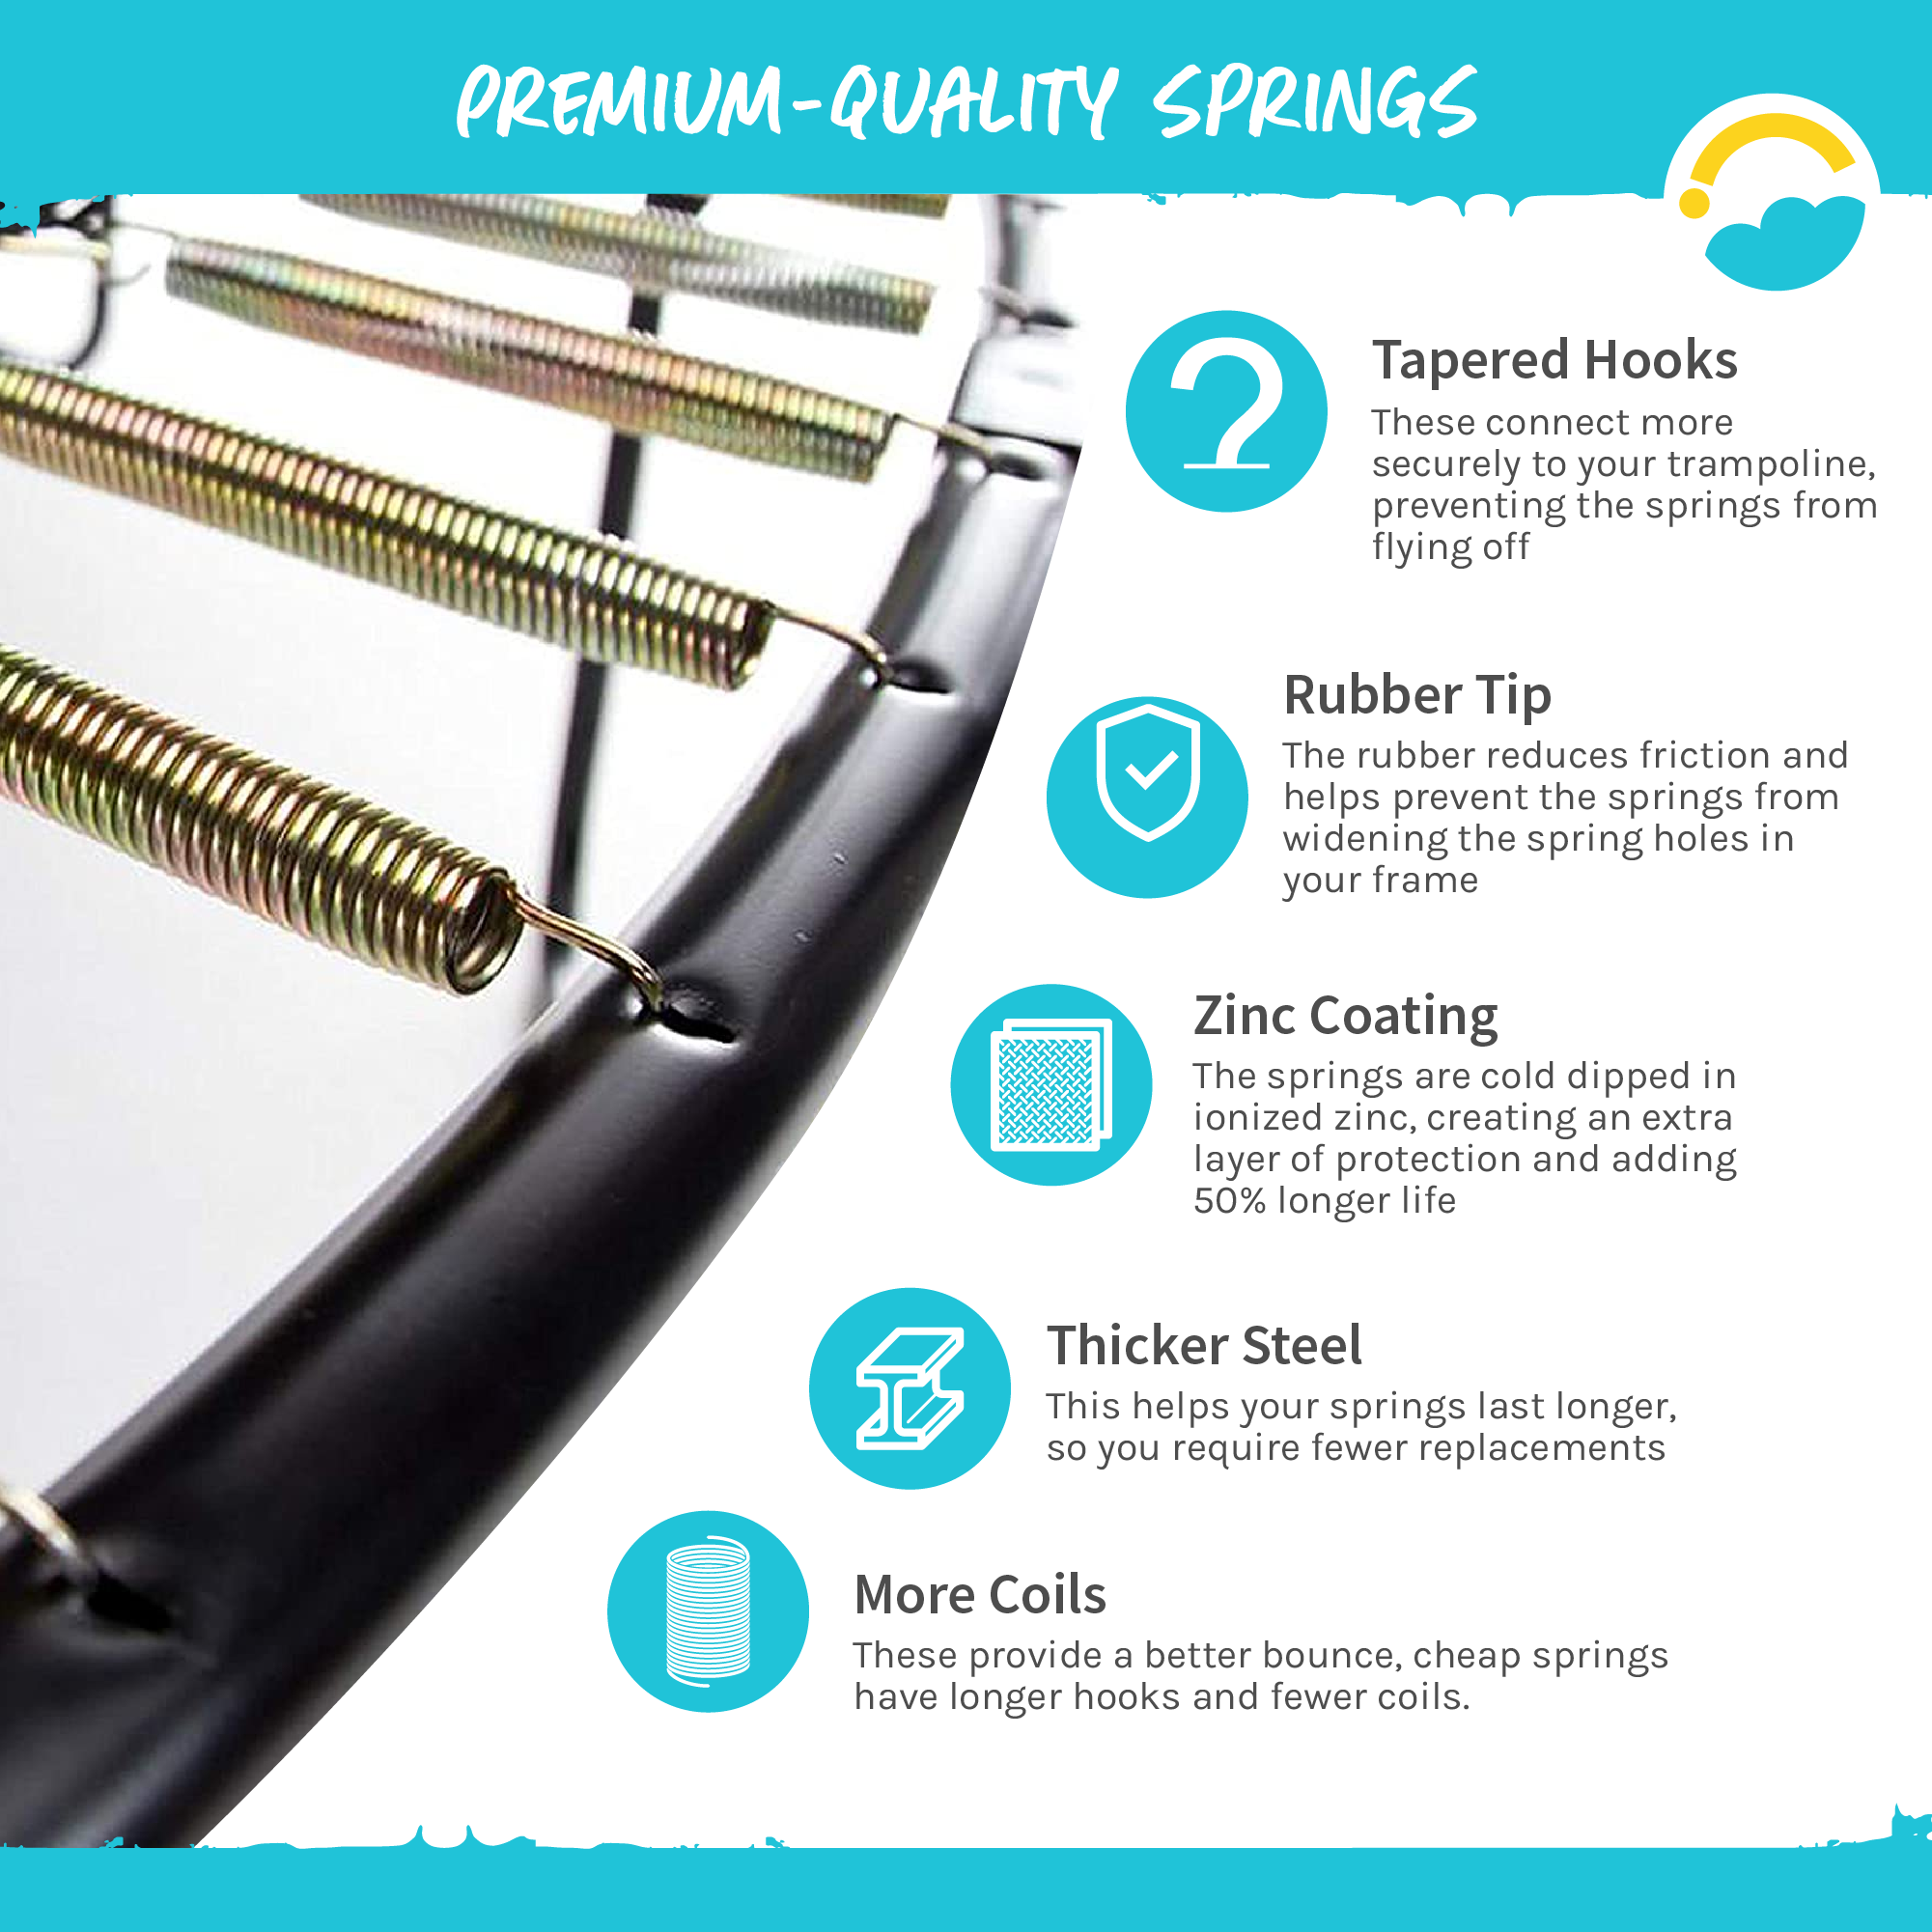 Premium-Quality Springs. Tapered Hooks, Rubber Tip, Zinc Coating, Thicker Steel, and More Coils.